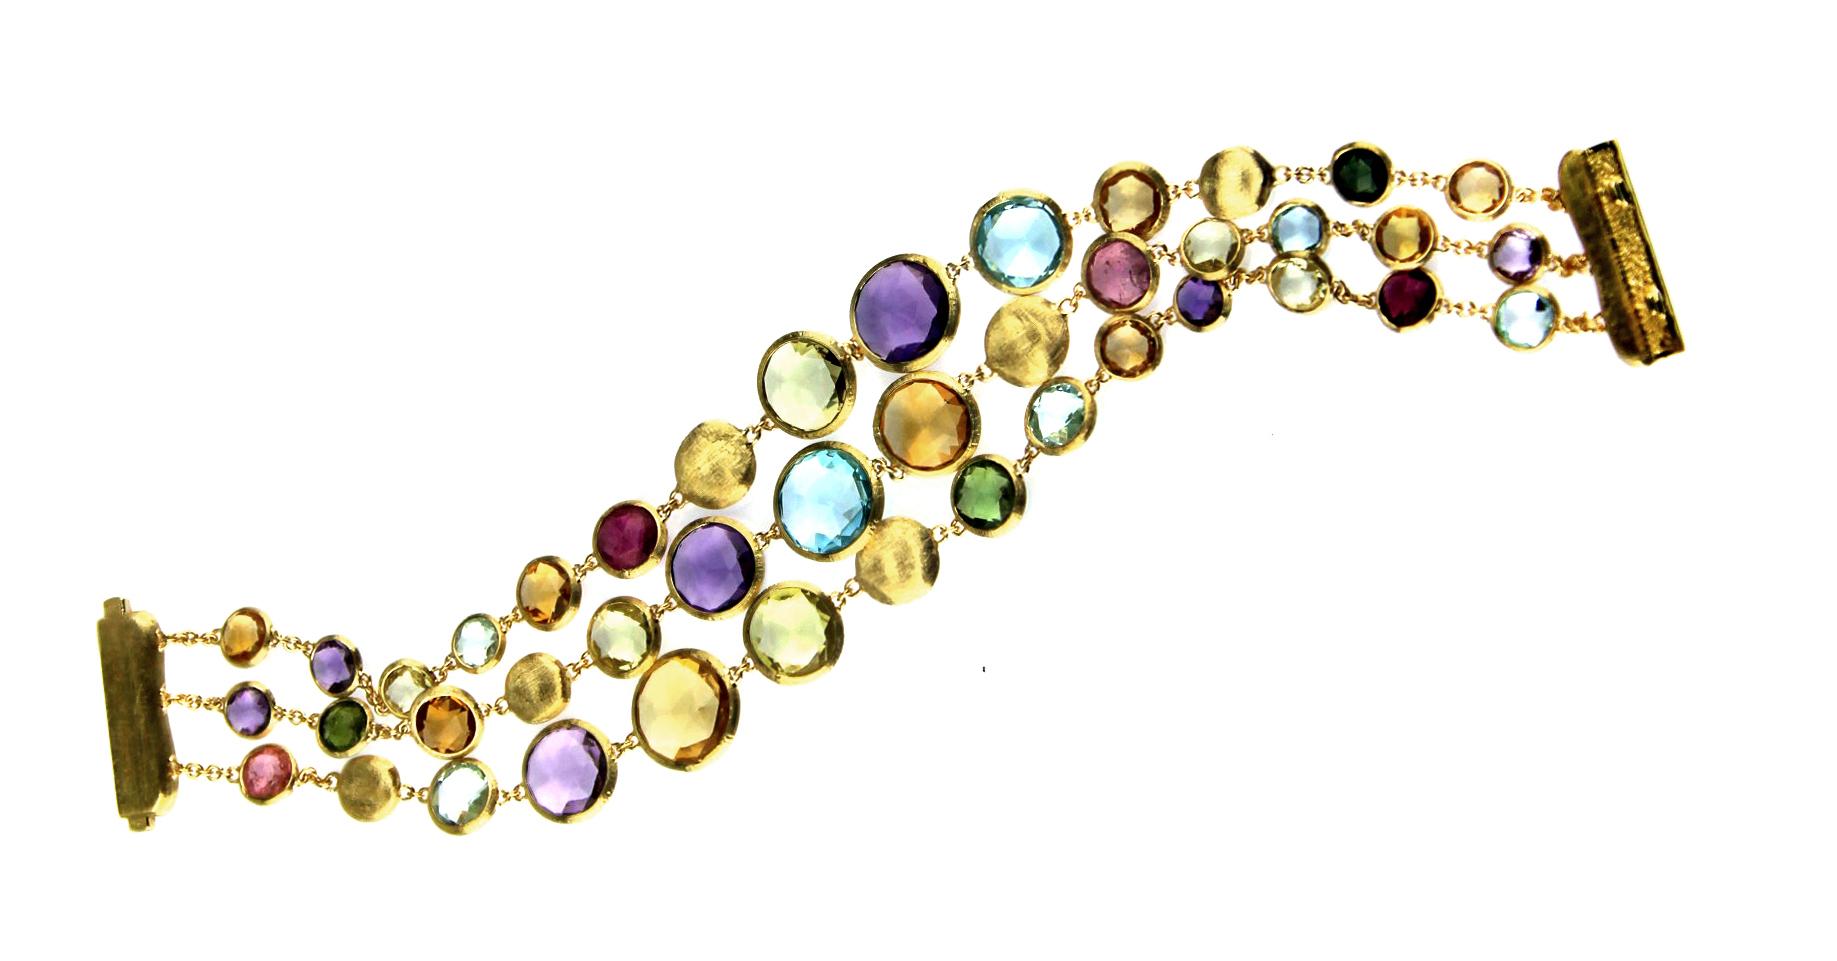 Italian artisan Marco Bicego has handcrafted this vibrantly hued piece, the Jaipur Bracelet. Three round-link chains feature assorted round-cut, bezel-set stones: amethyst, citrine, garnet, iolite, pink and green tourmaline, pink and smoky quartz,